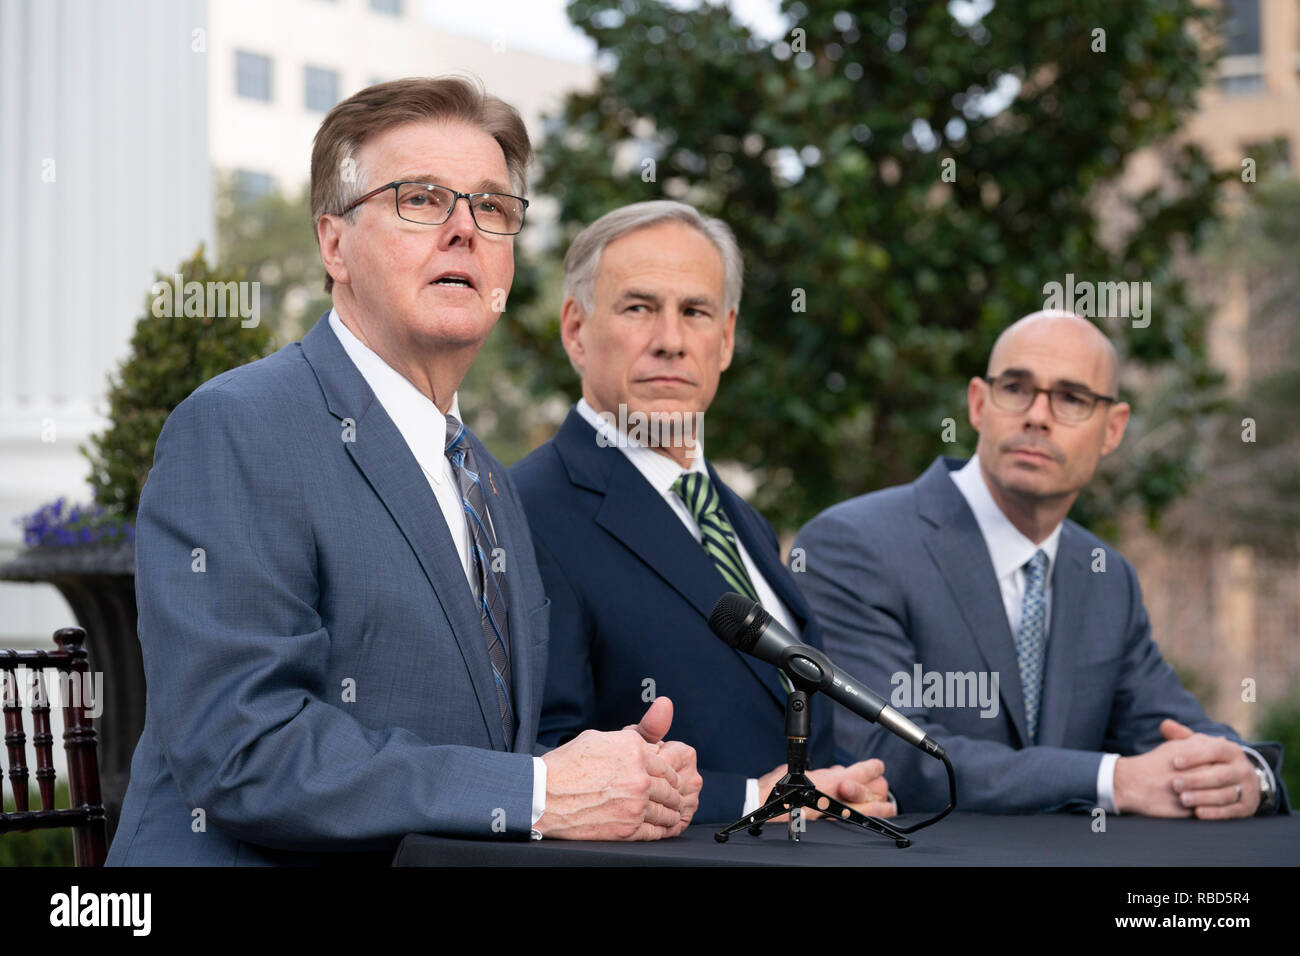 The leaders of Texas government, (from left) Lt. Gov. Dan Patrick, Gov. Greg Abbott and House Speaker Dennis Bonnen, meet the press outside the Governor's Mansion in Austin the day after the start of the 86th legislative session. Stock Photo